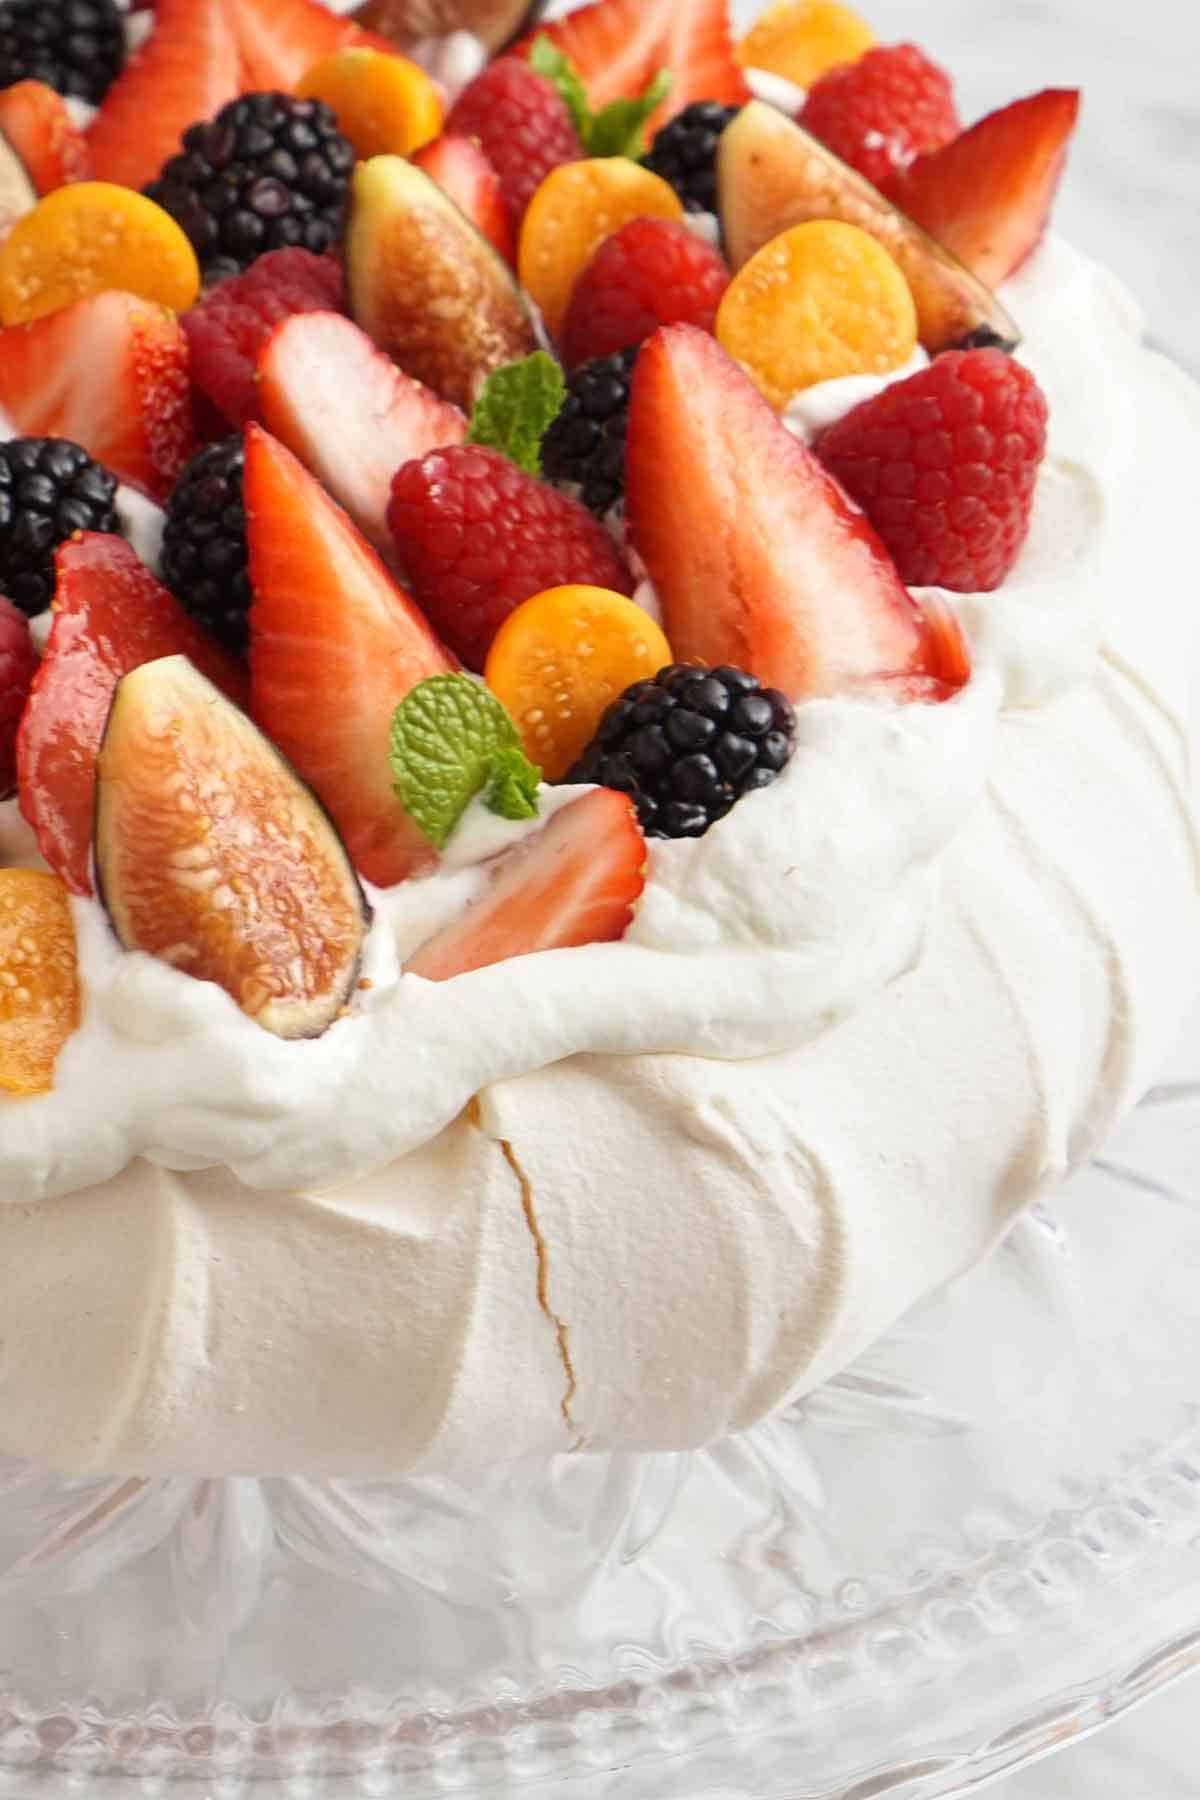 A close up view of a pavlova topped with fresh berries.